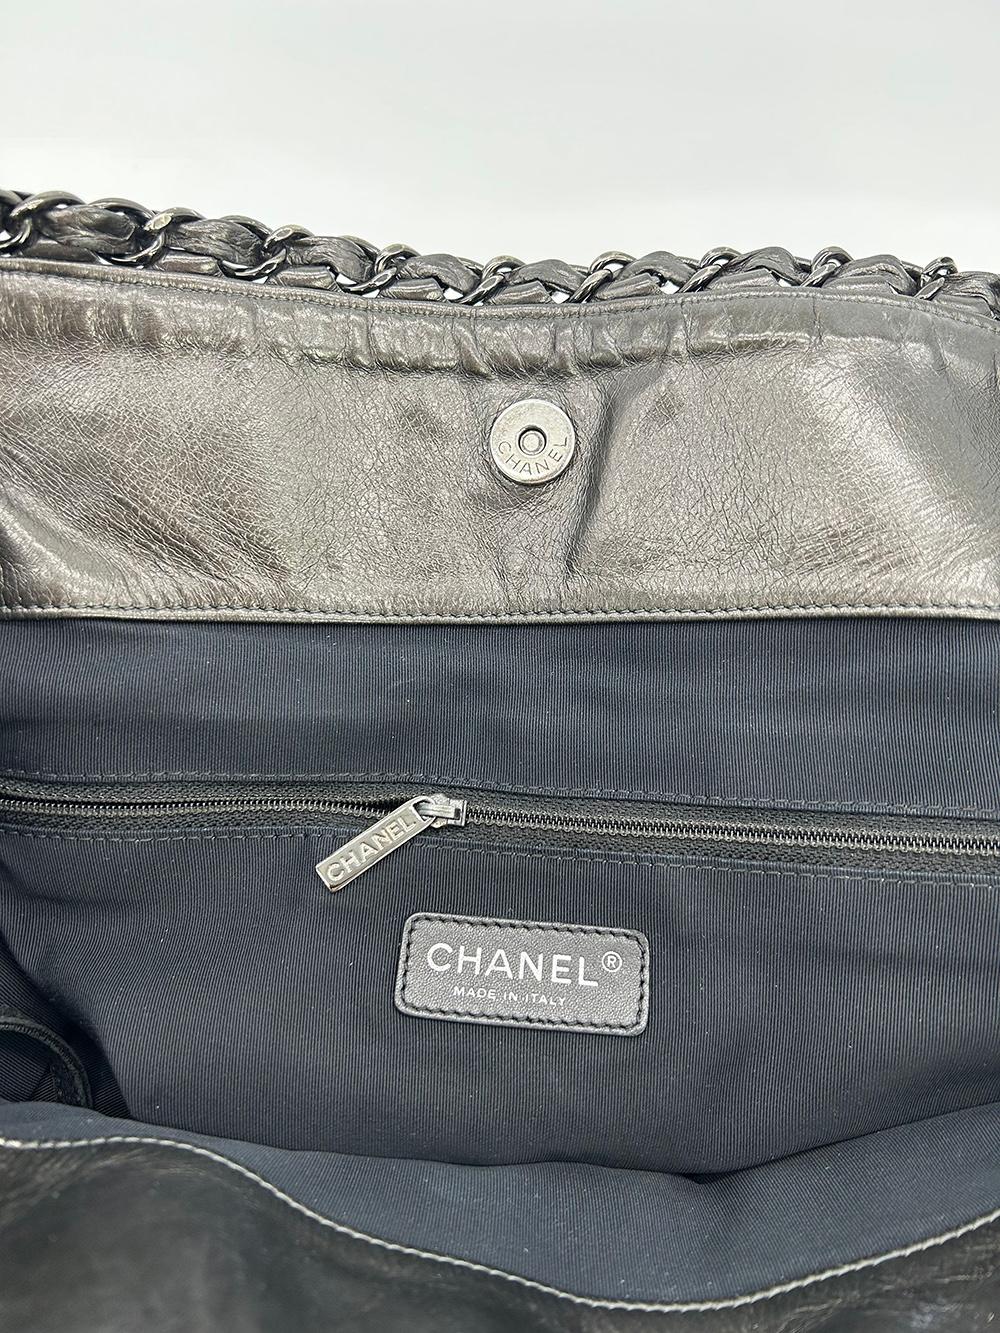 Chanel Grey Metallic Leather Chain Me Shoulder Bag Tote For Sale 5